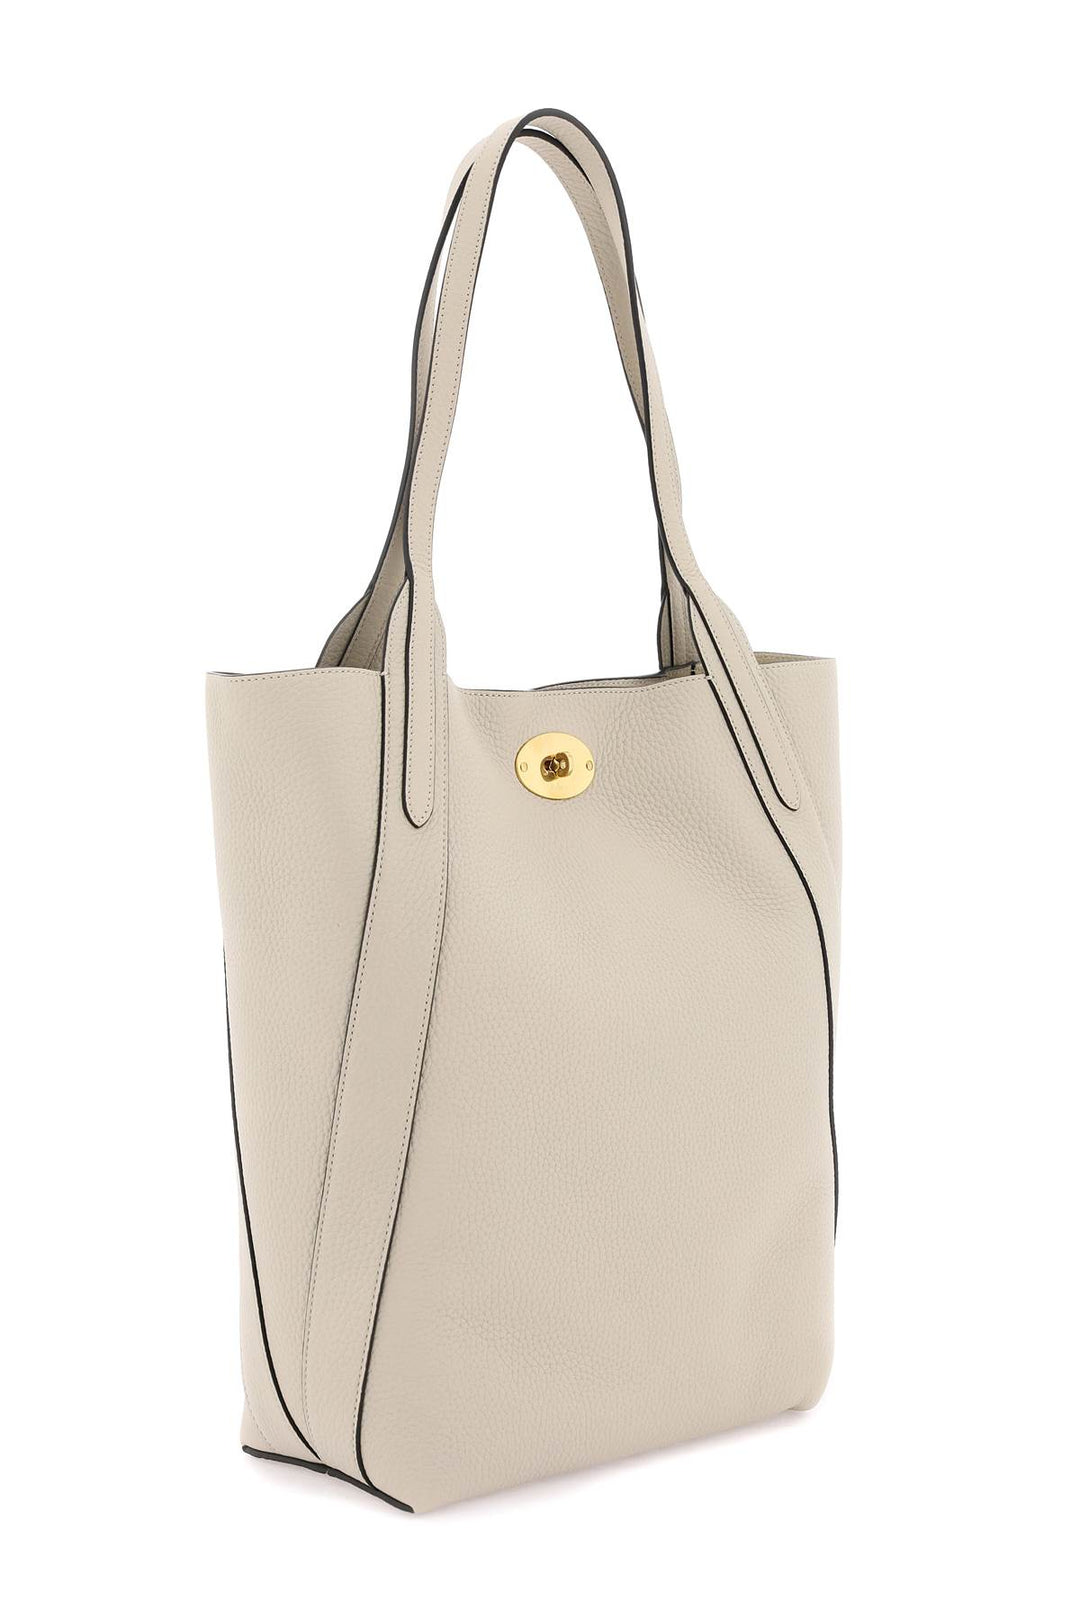 Mulberry Grained Leather Bayswater Tote Bag   Neutro